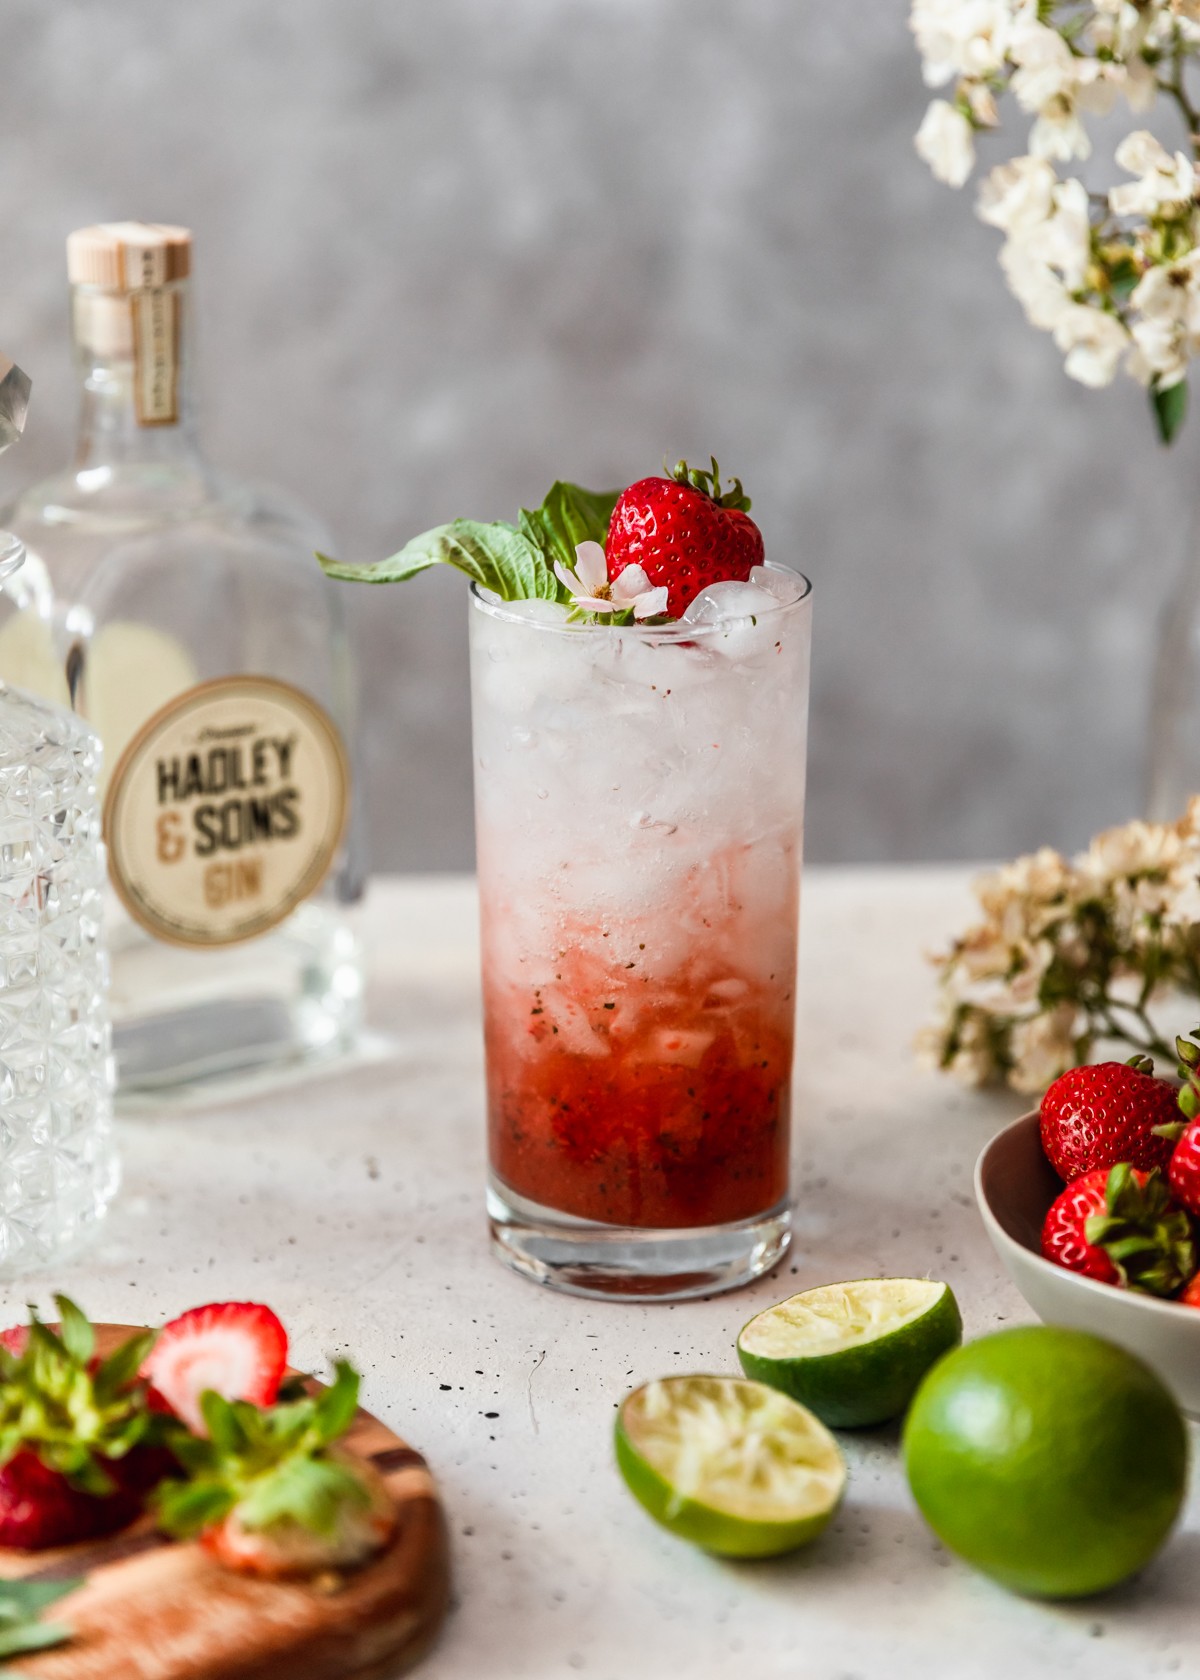 A side image of a strawberry gin smash garnished with a strawberry, basil, and white flower on a white table next to a grey bowl of strawberries, bar glasses, bottle of gin, and halved limes with a grey and white background.